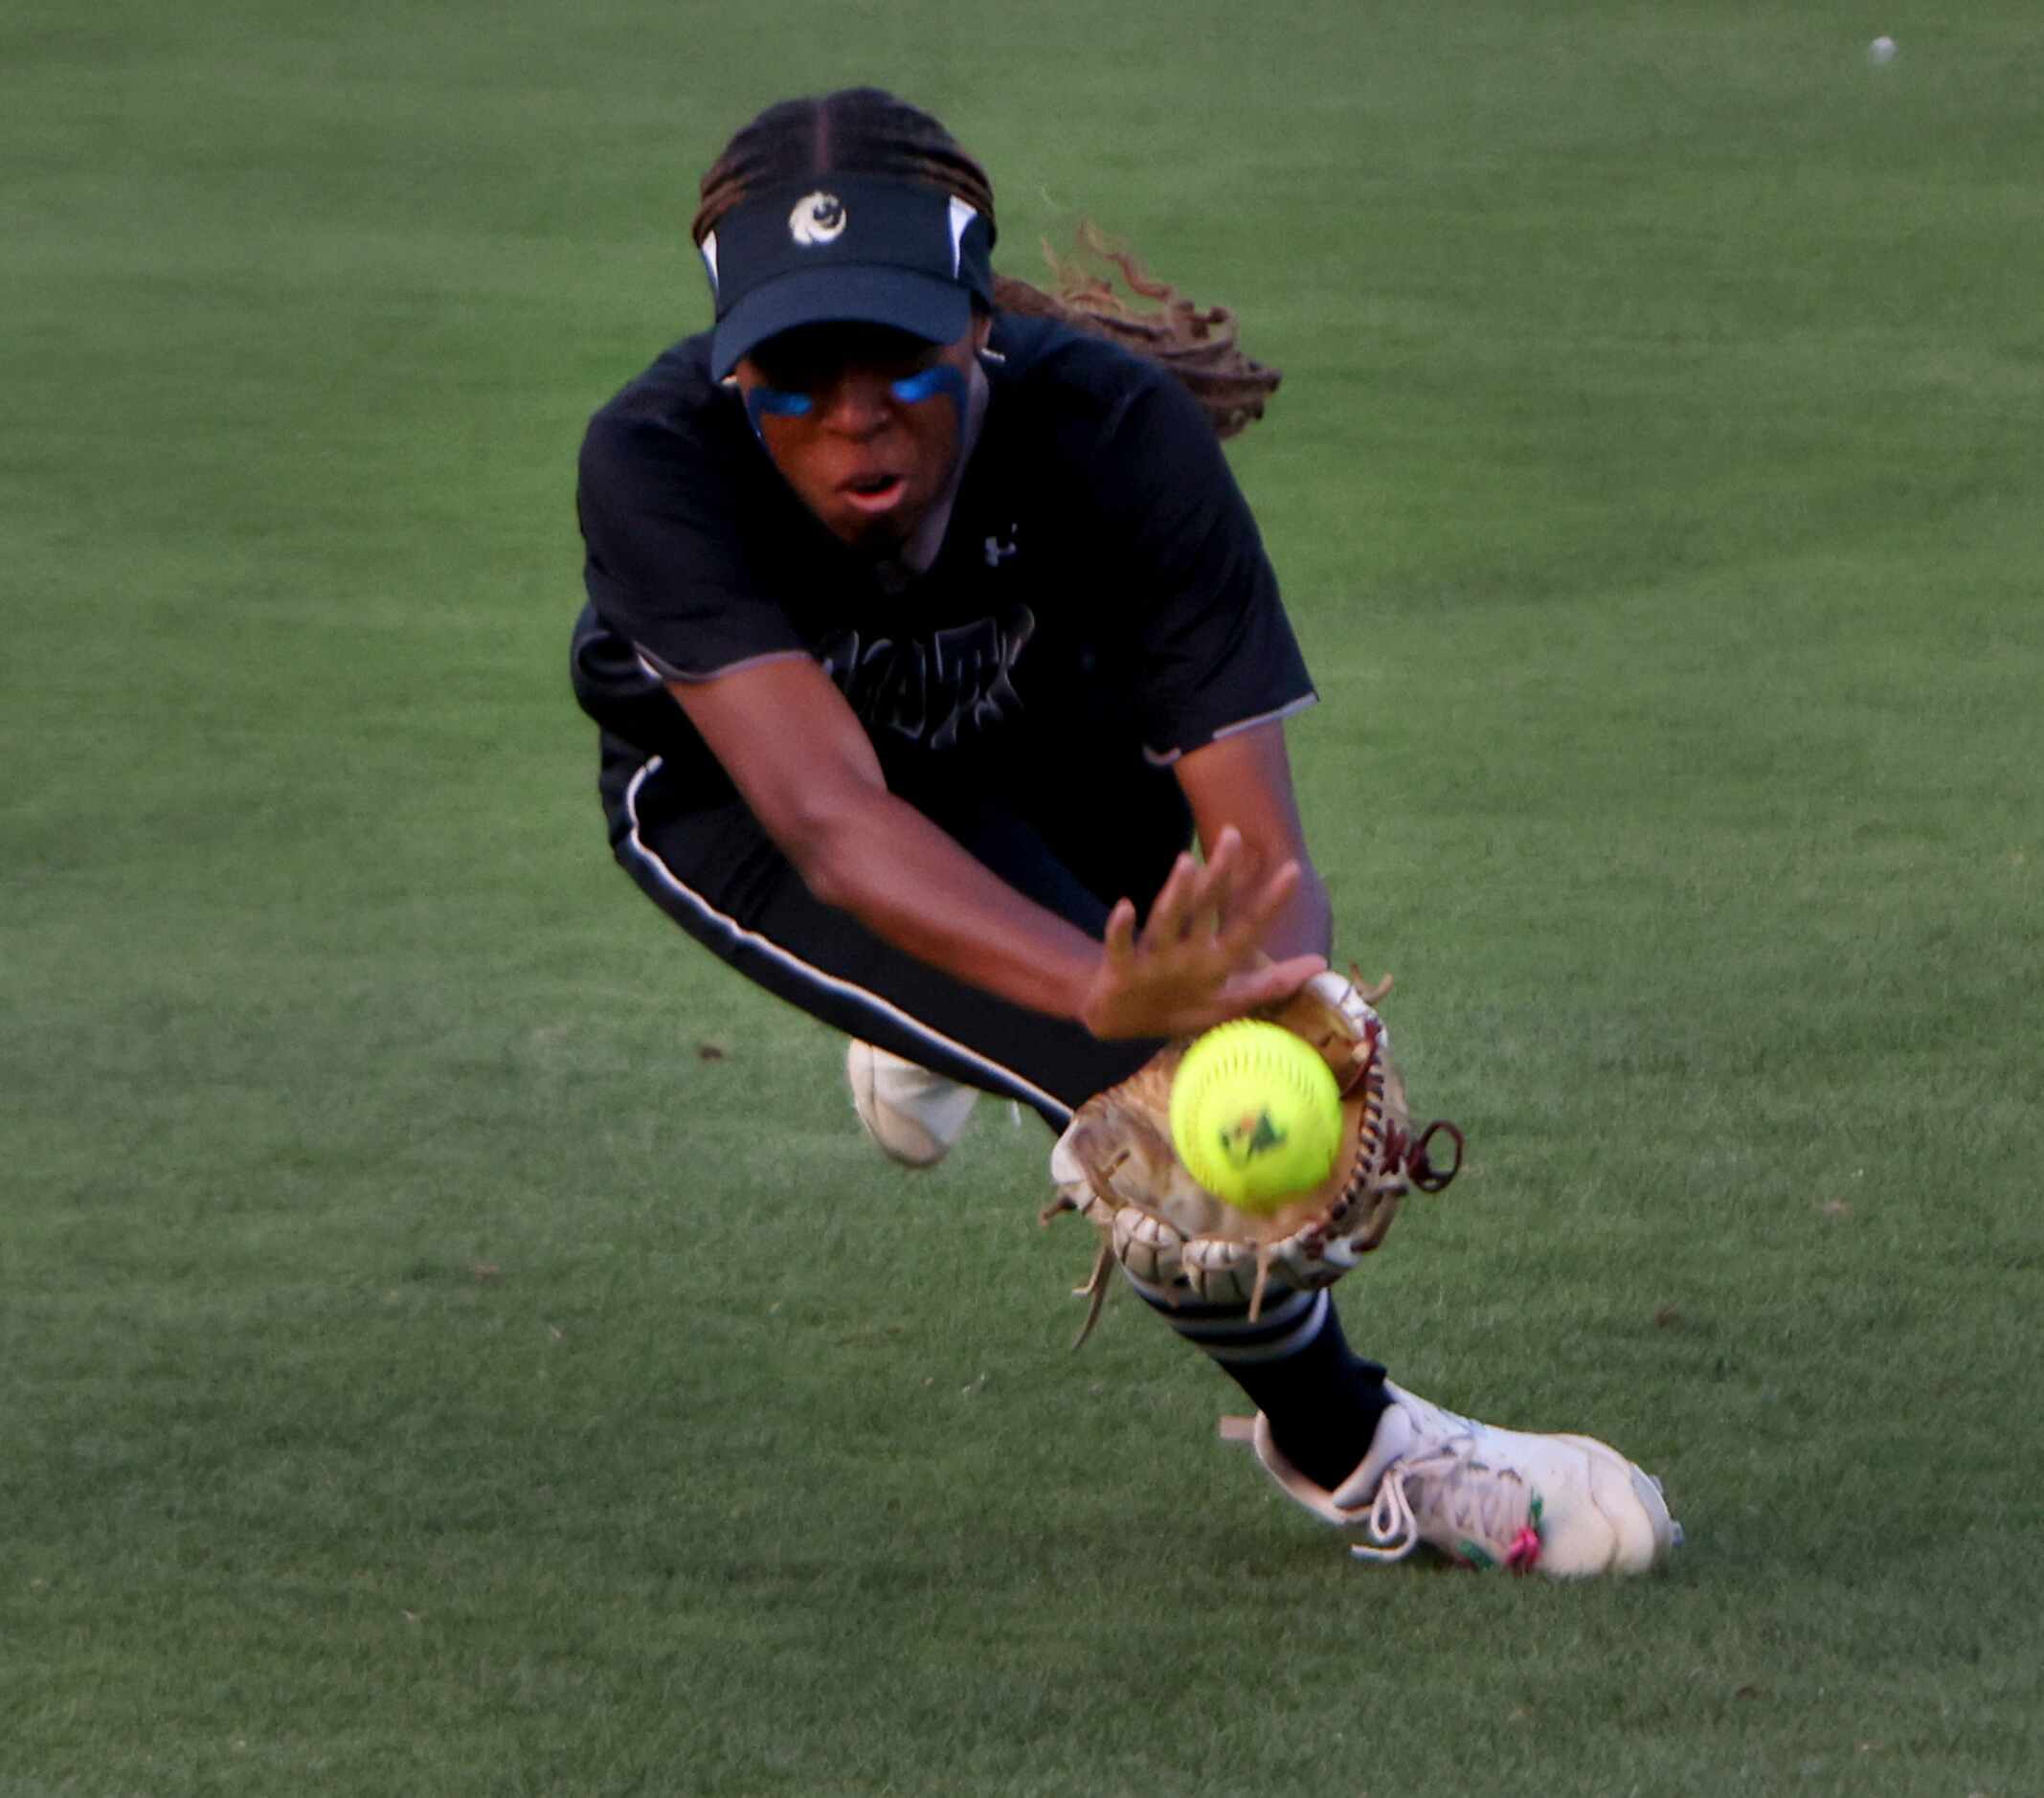 Denton Guyer right fielder Lauryn Jones (3) shows great concentration as she lunges for a...